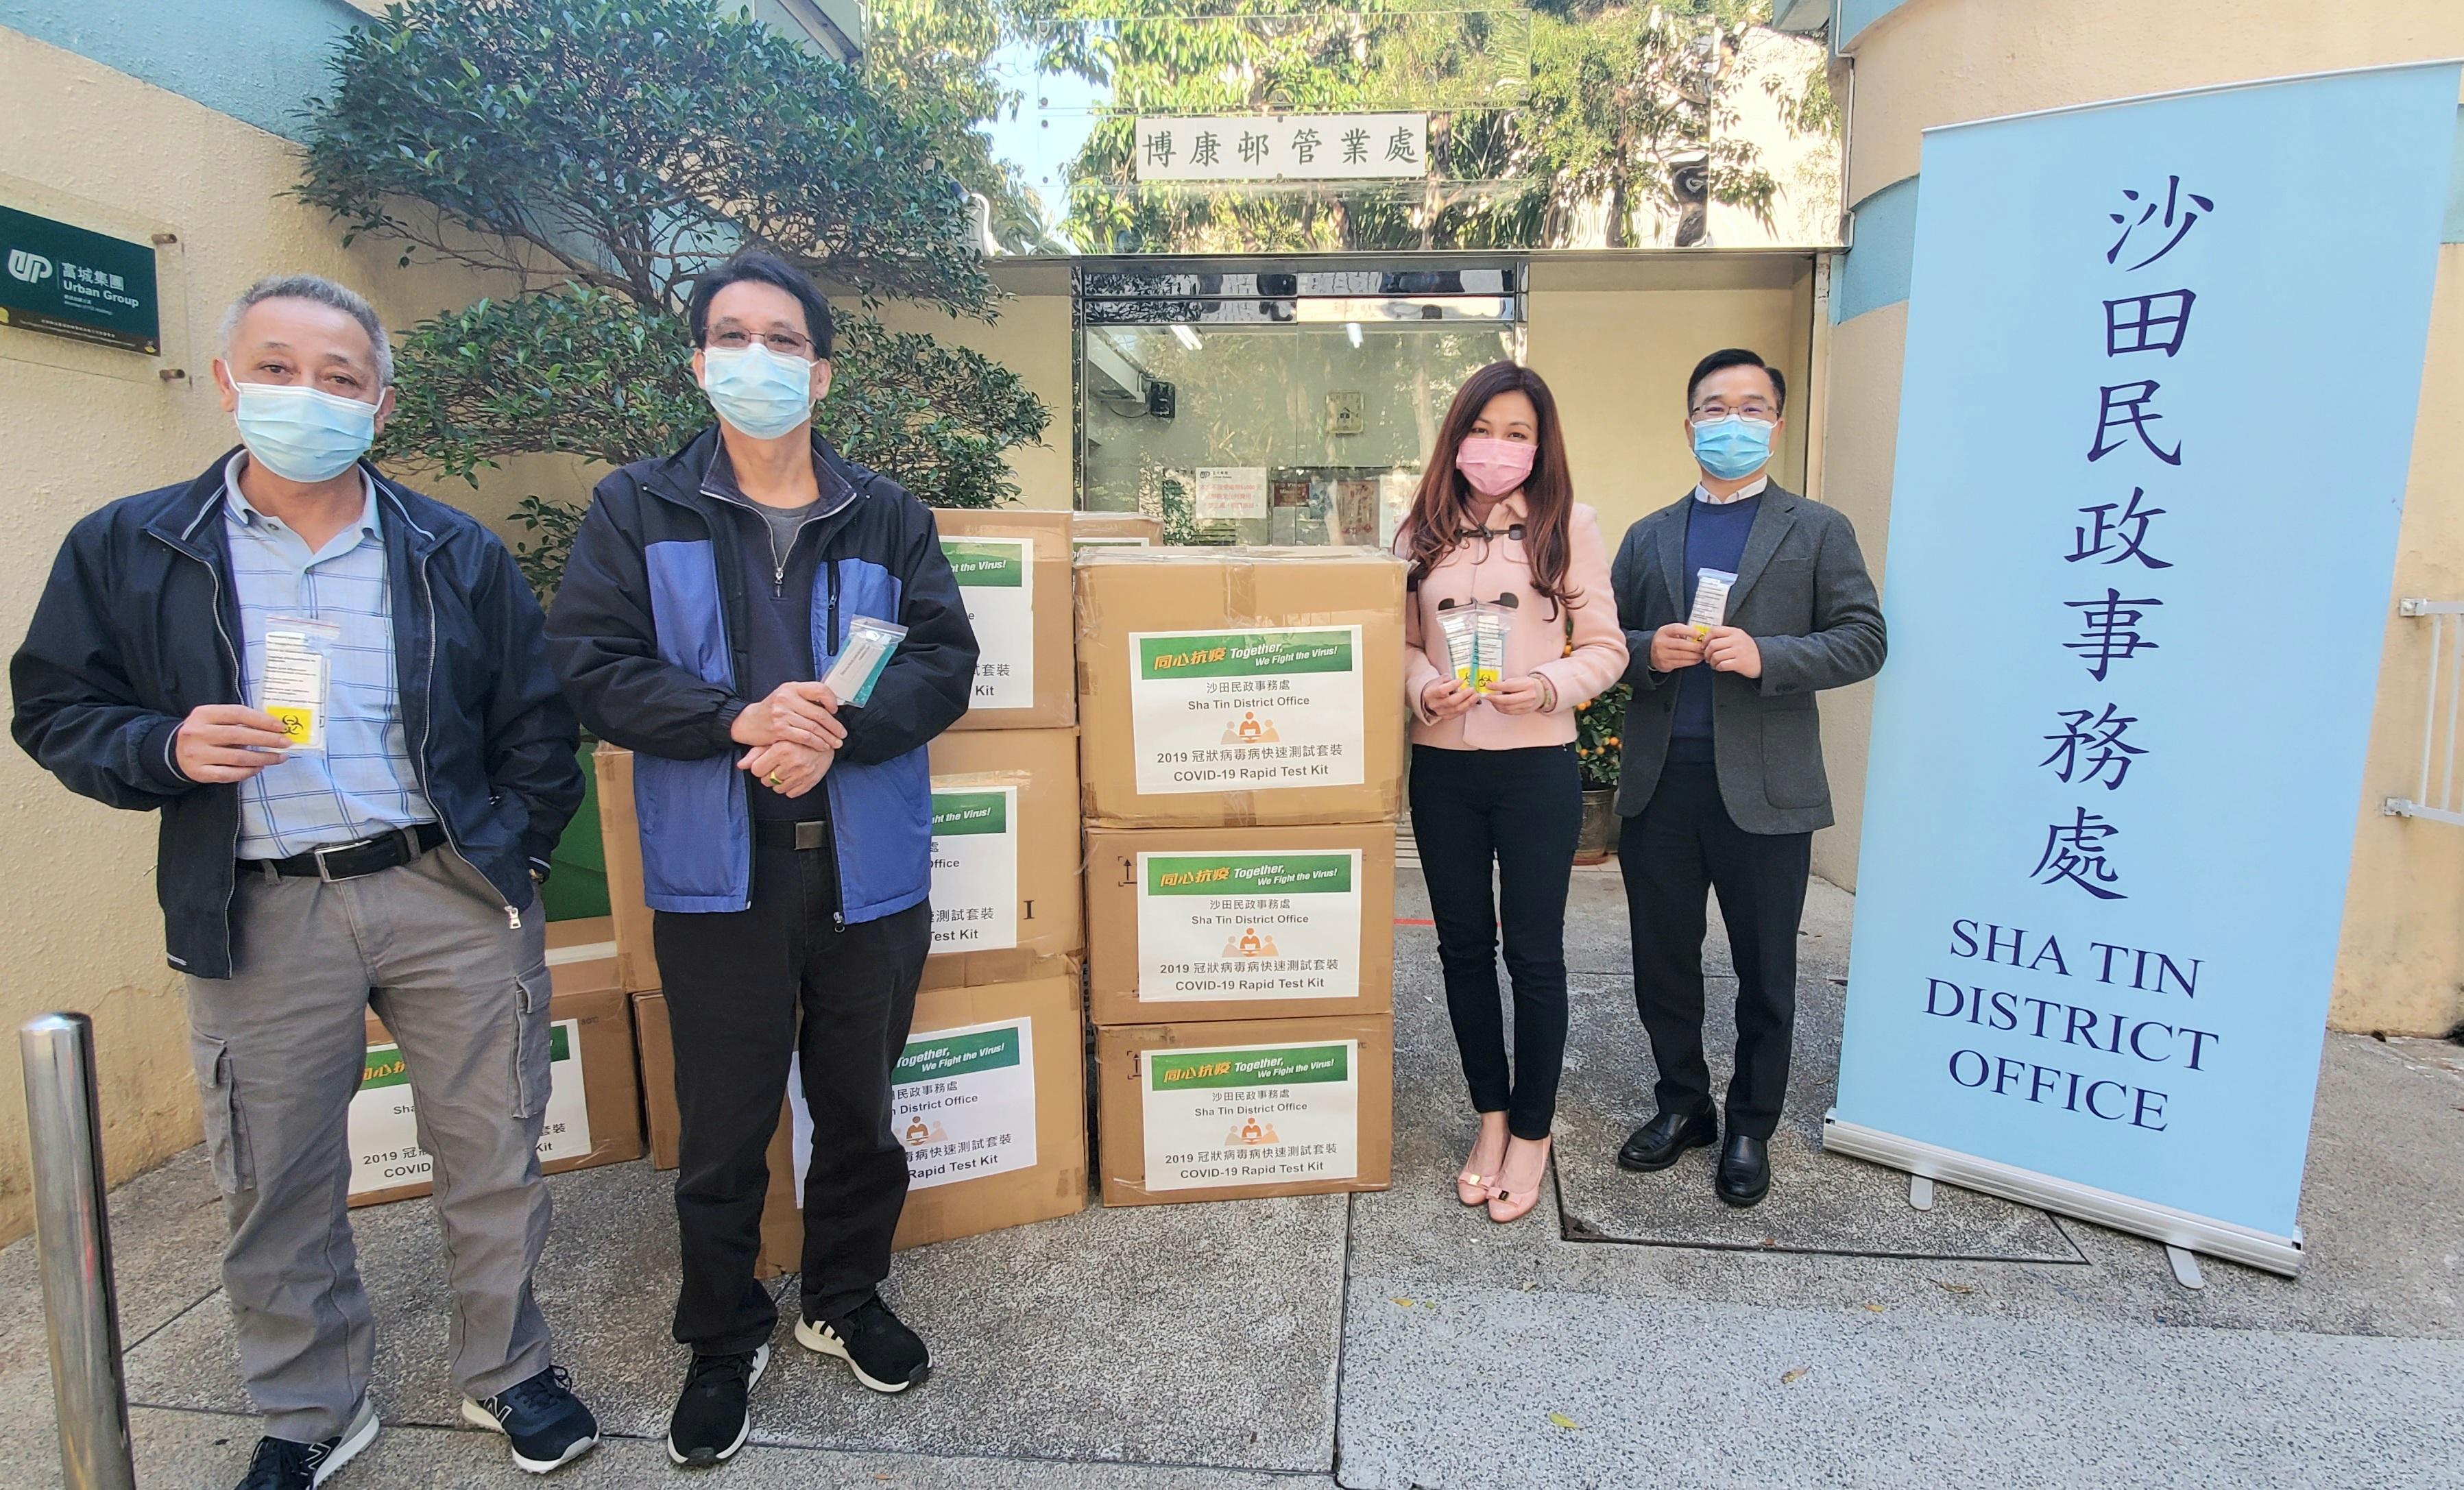 The Sha Tin District Office today (February 14) distributed rapid test kits to households, cleansing workers and property management staff living and working in Pok Chi House, Pok Yat House and Pok Tai House for voluntary testing through the owners' corporation and the property management company of Pok Hong Estate.